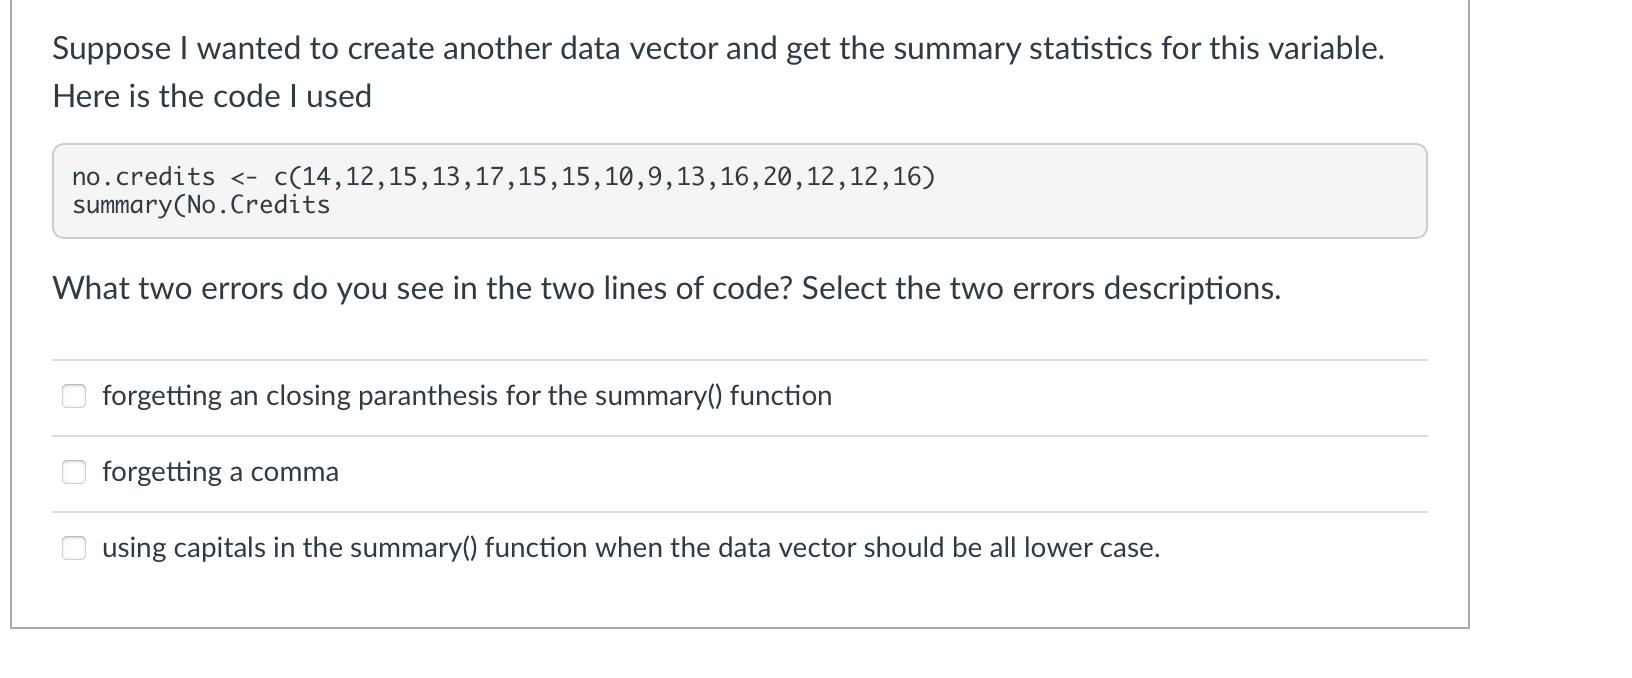 Suppose I wanted to create another data vector and get the summary statistics for this variable. Here is the